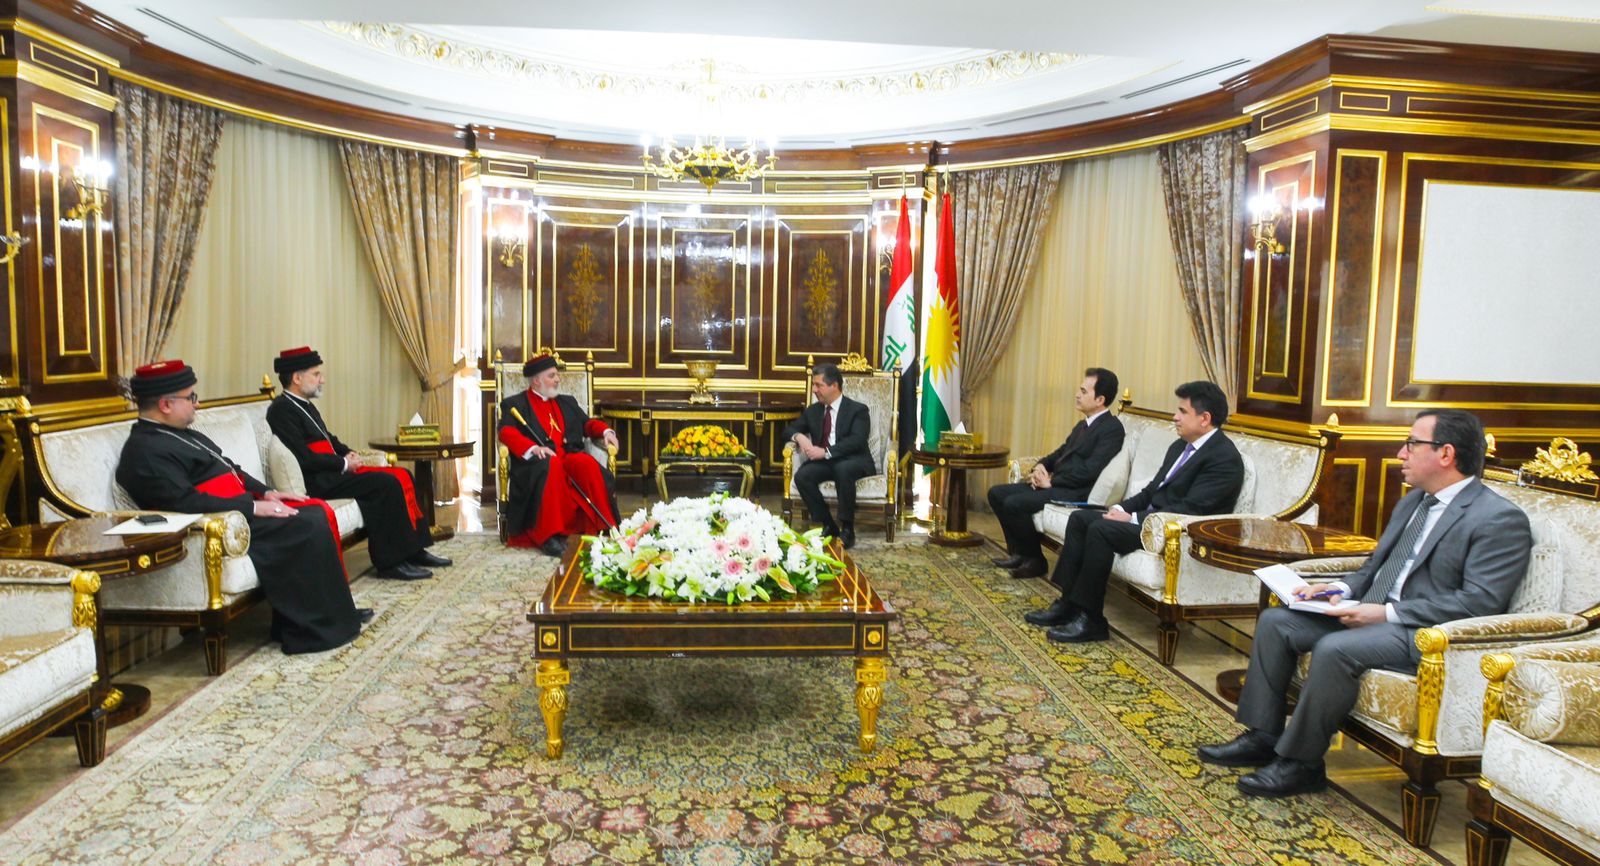 Kurdistan's PM confirmed KRG's support to promote "a culture of tolerance and peaceful coexistence" 